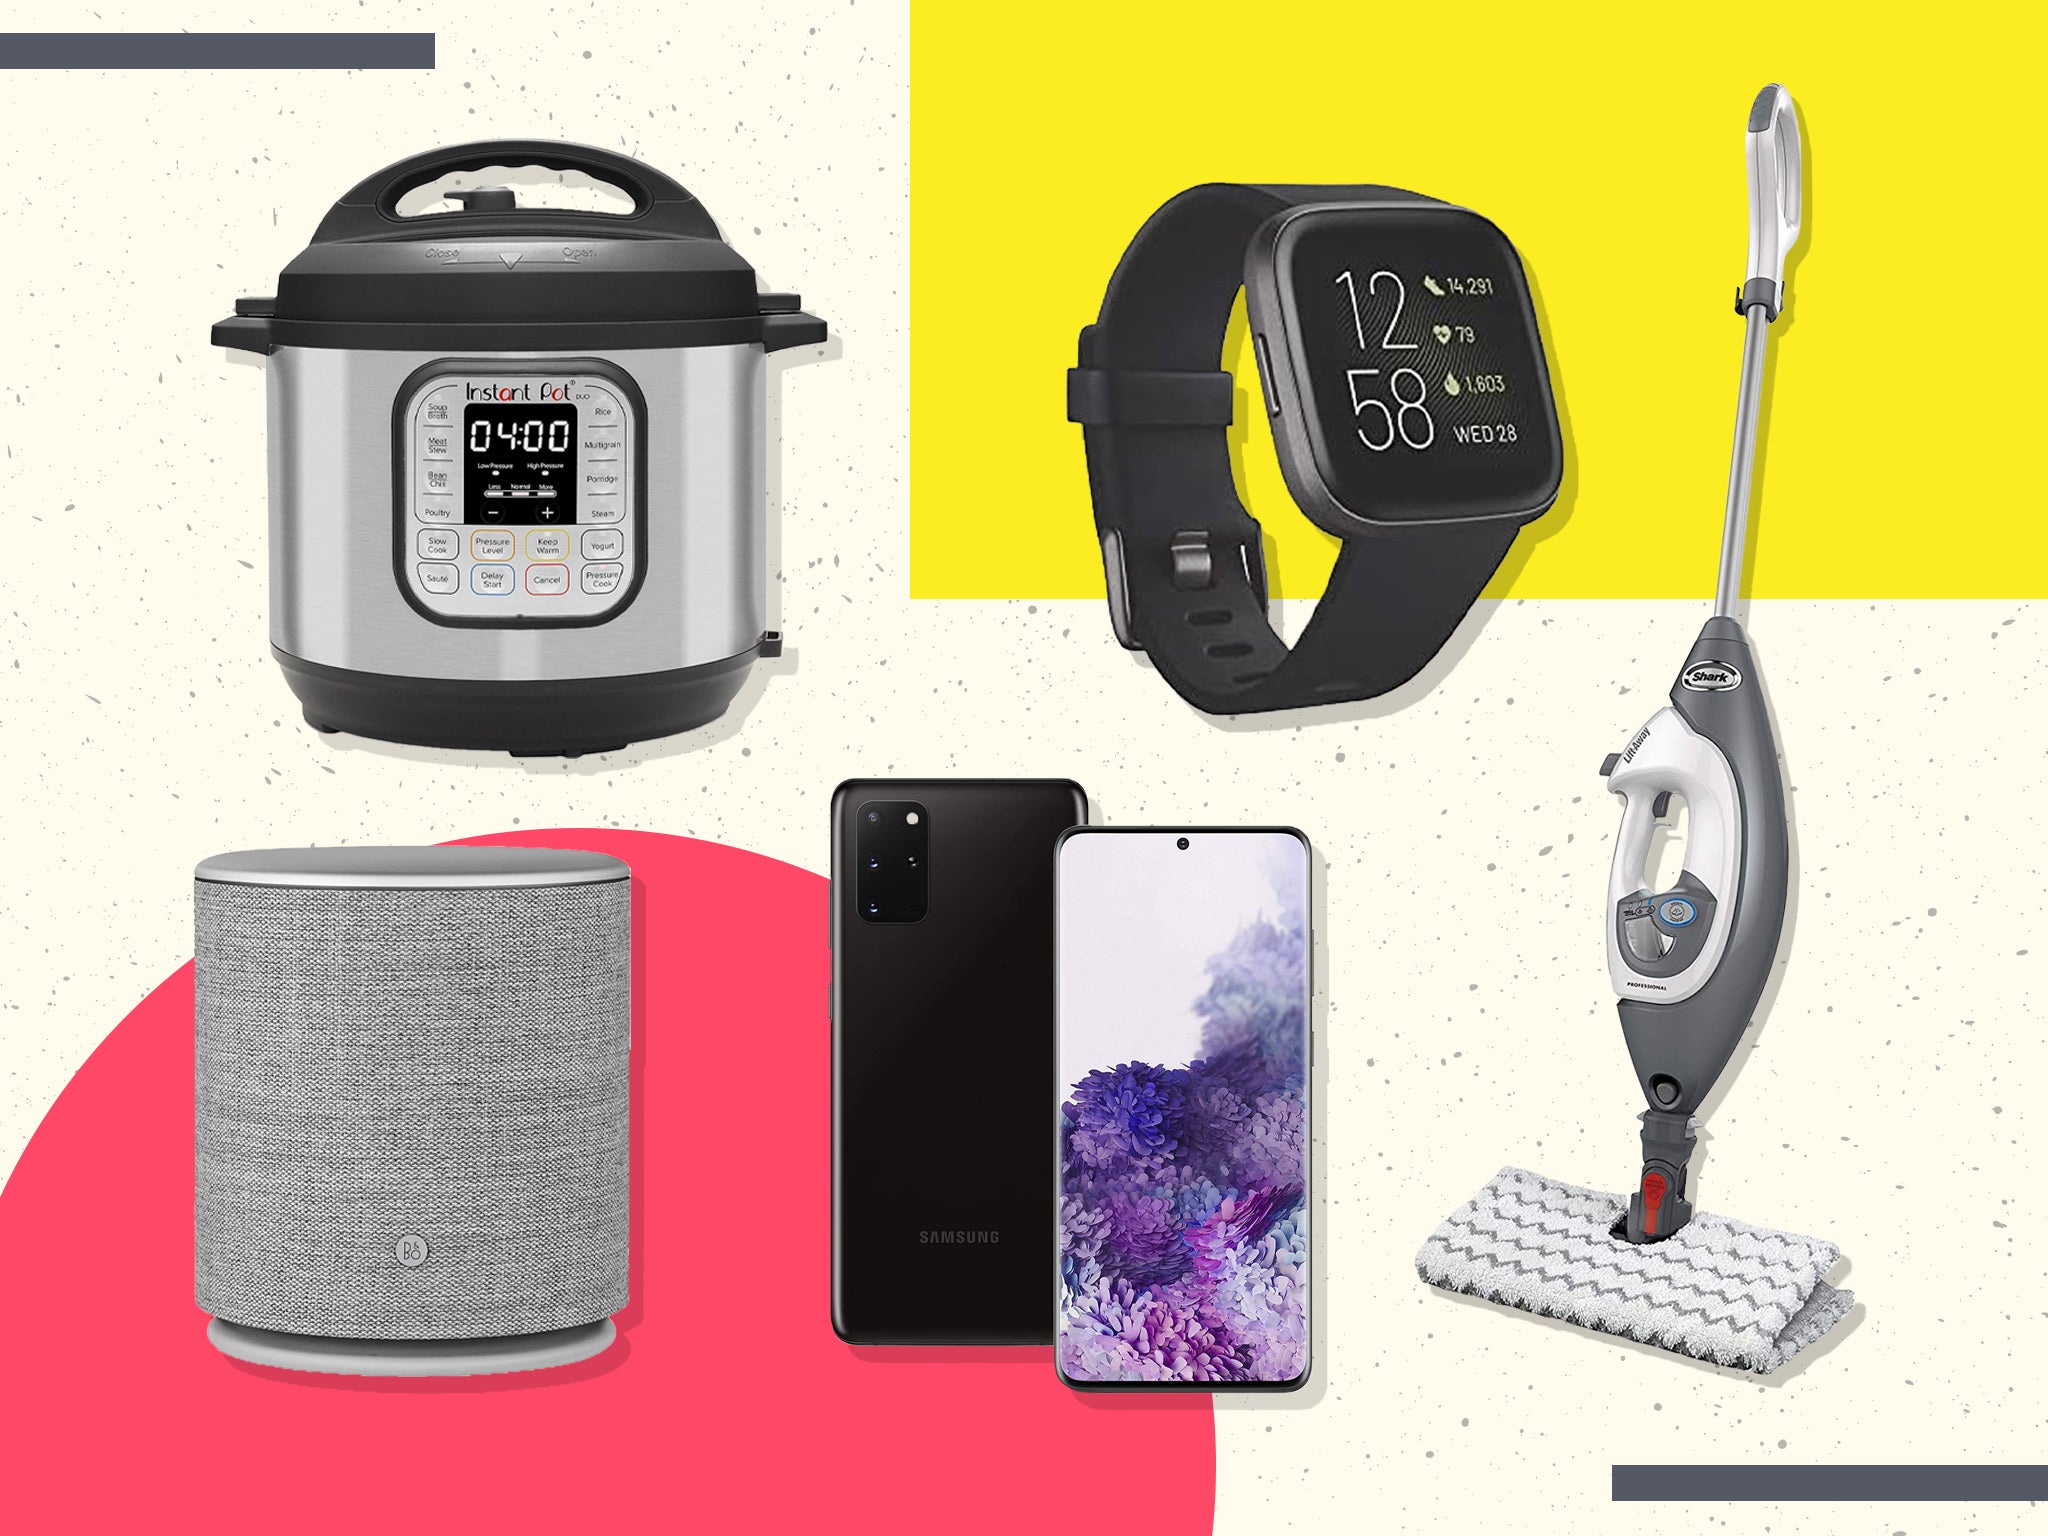 Last Chance: The Best Prime Day Deals You Can Still Get on